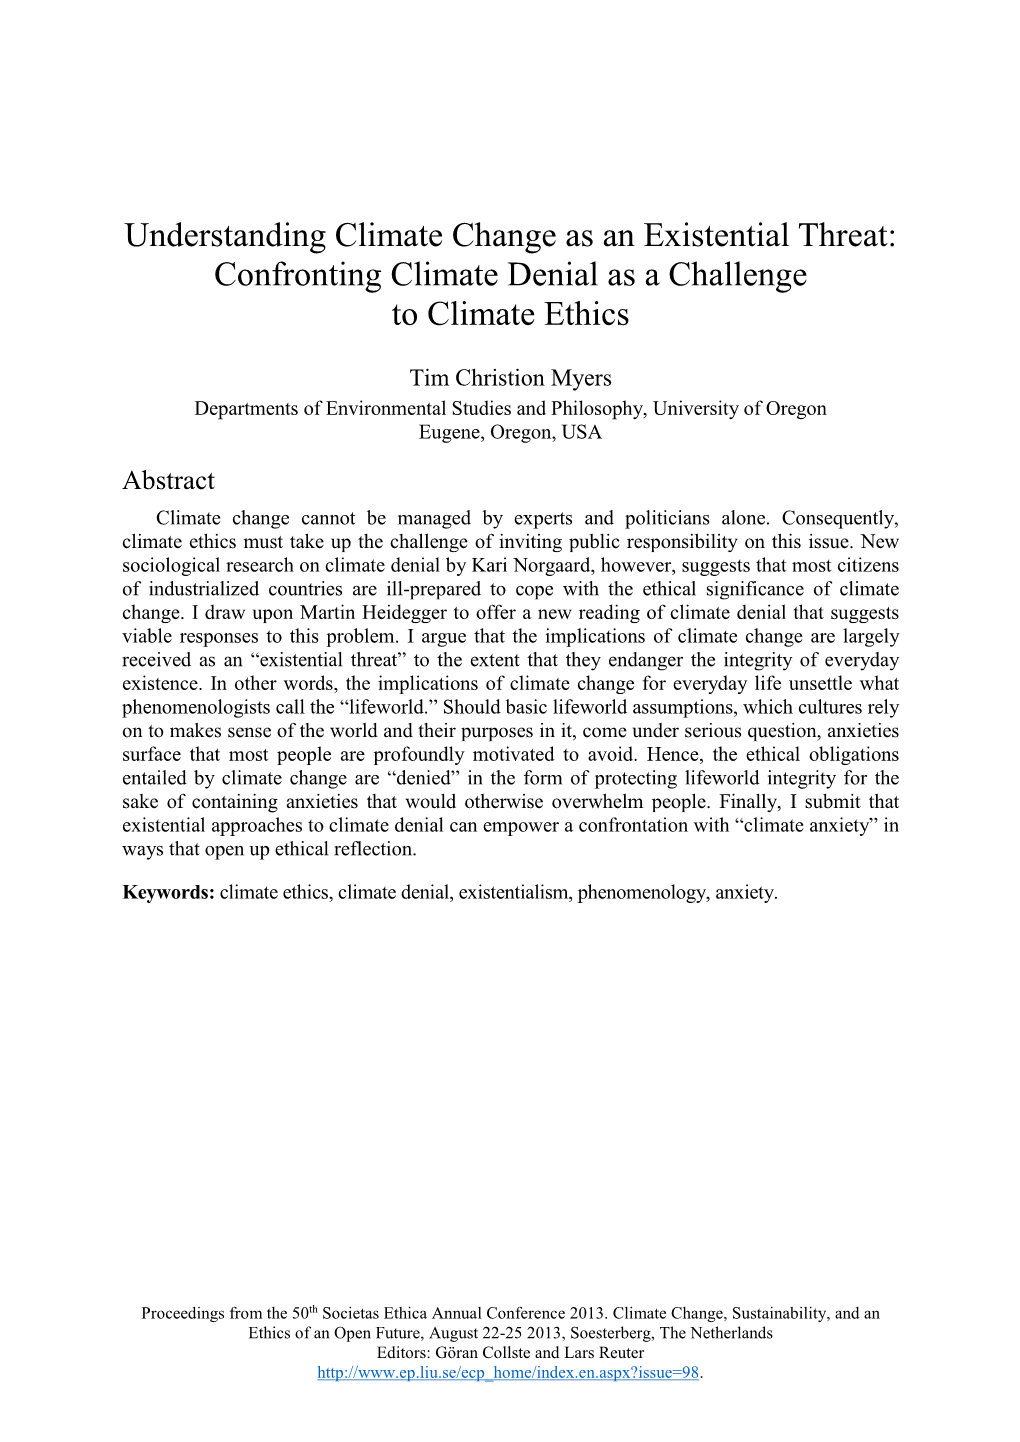 Understanding Climate Change As an Existential Threat: Confronting Climate Denial As a Challenge to Climate Ethics